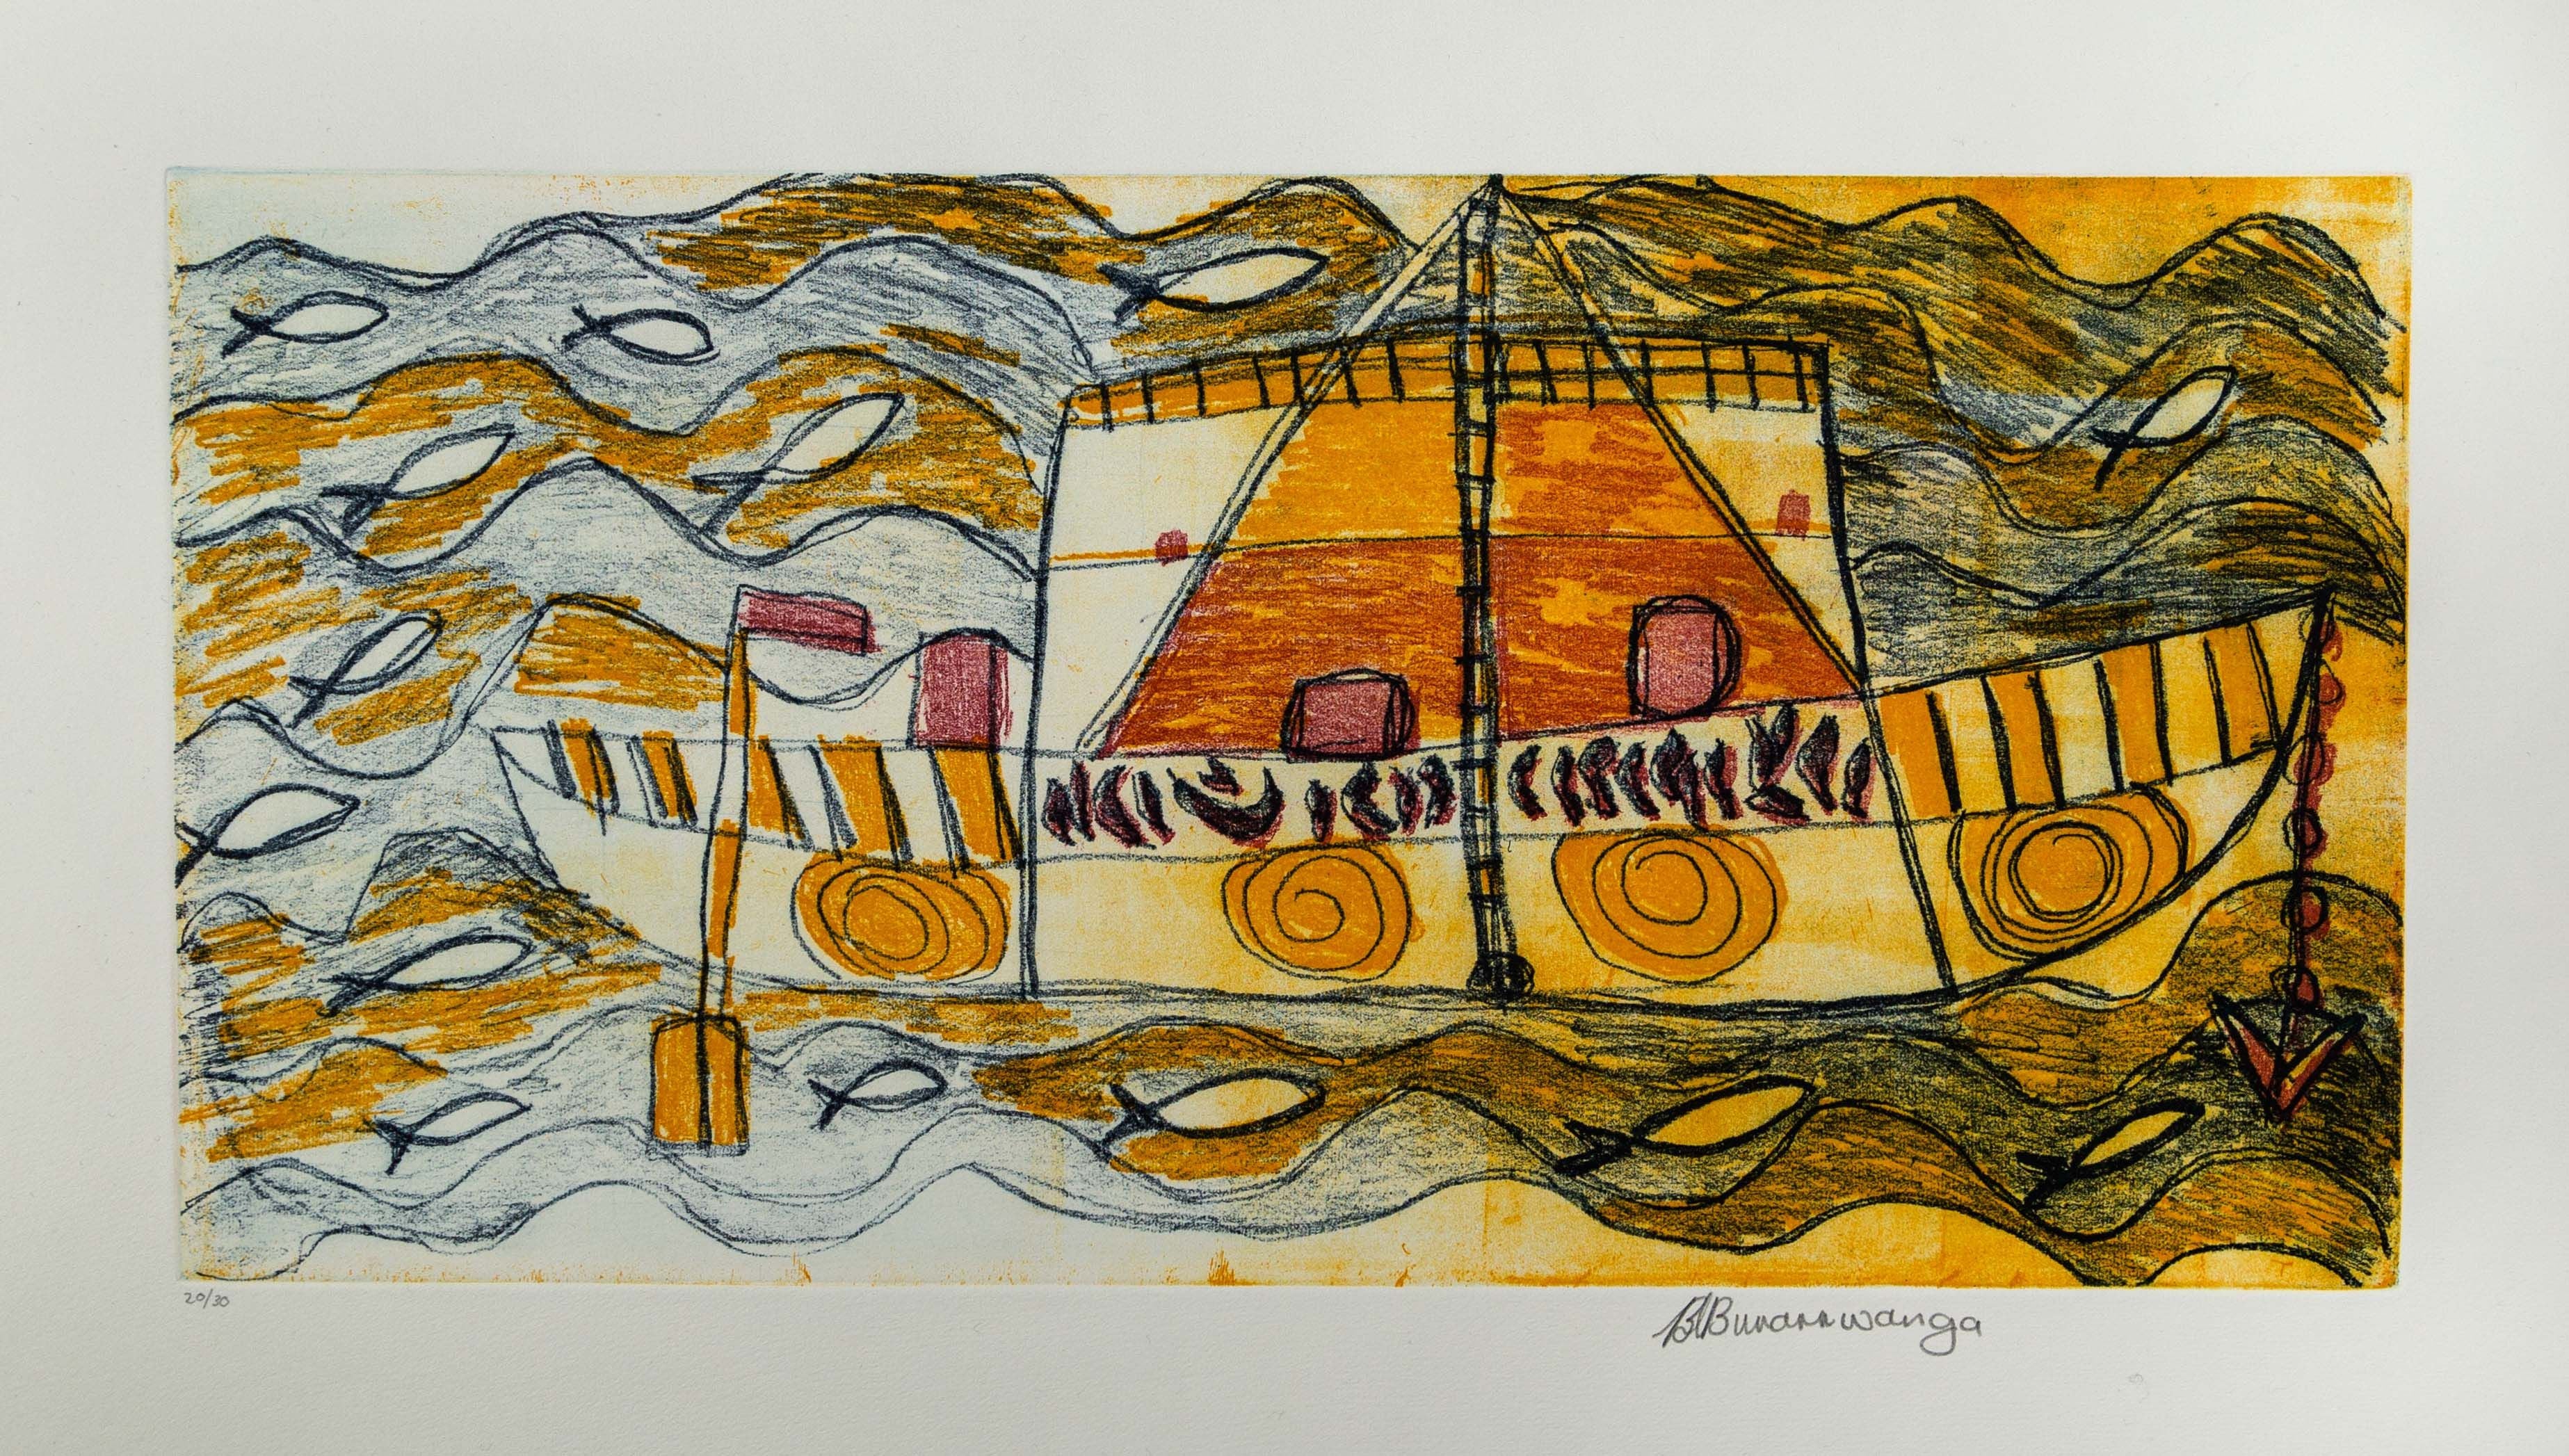 Laklak 2 (Ŋuliny) Ganambarr, ‘Macassan Boat,’ 2008, etching, printing ink on Hannemulle paper, Berndt Museum Collection [2008/0077].